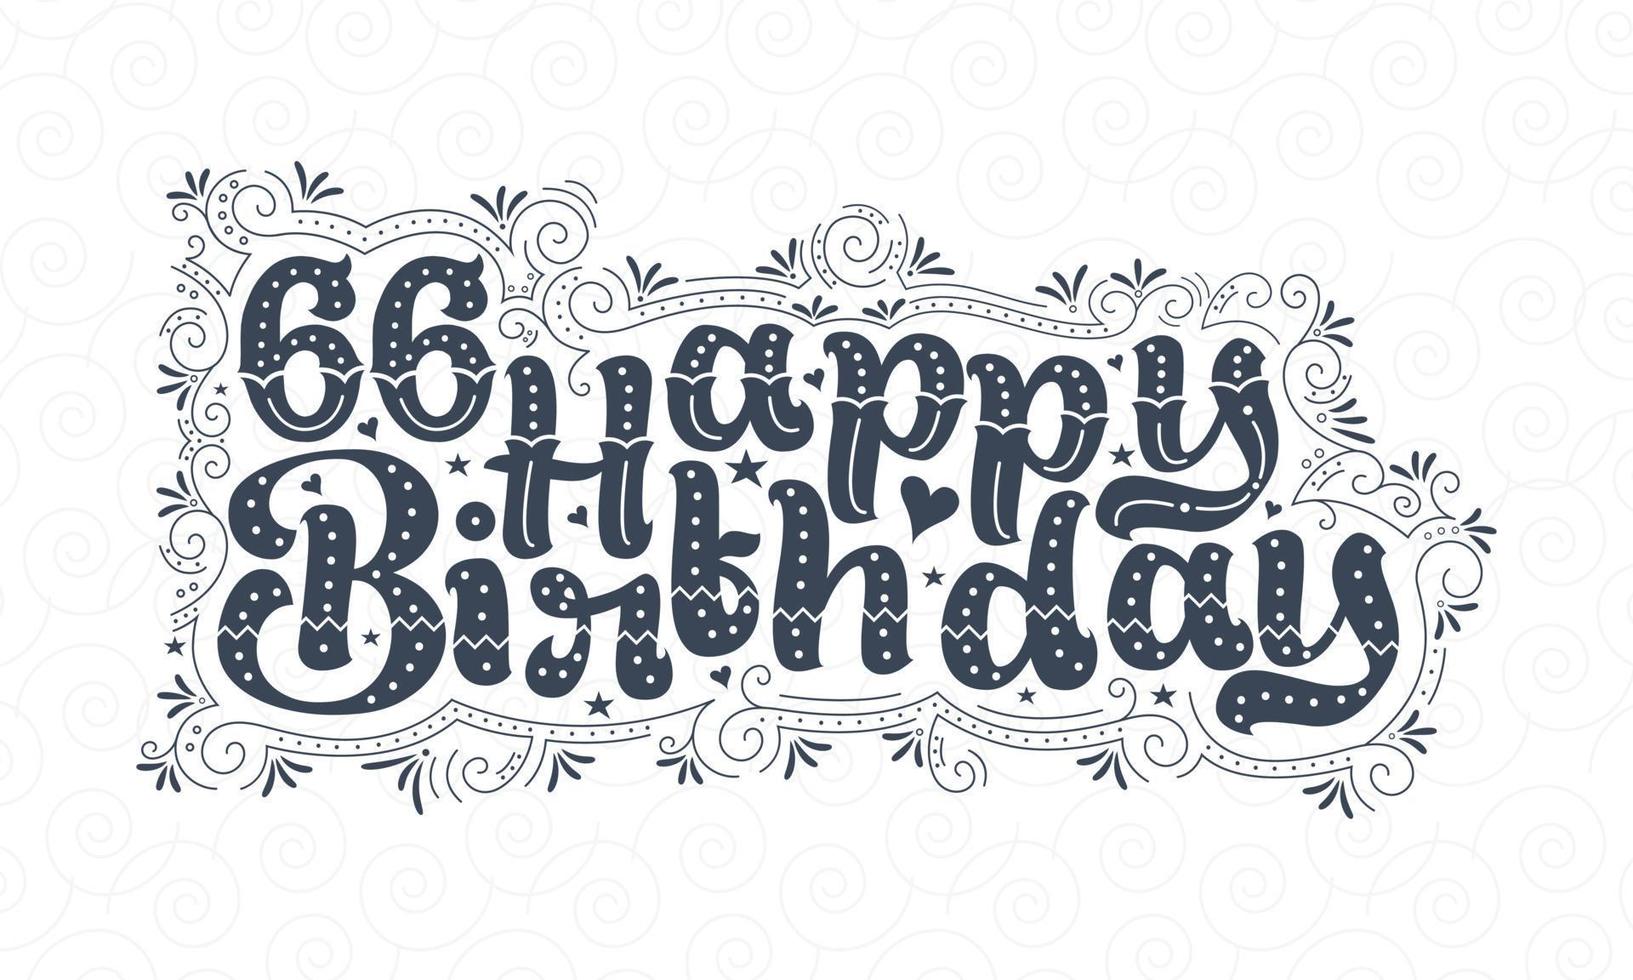 66th Happy Birthday lettering, 66 years Birthday beautiful typography design with dots, lines, and leaves. vector